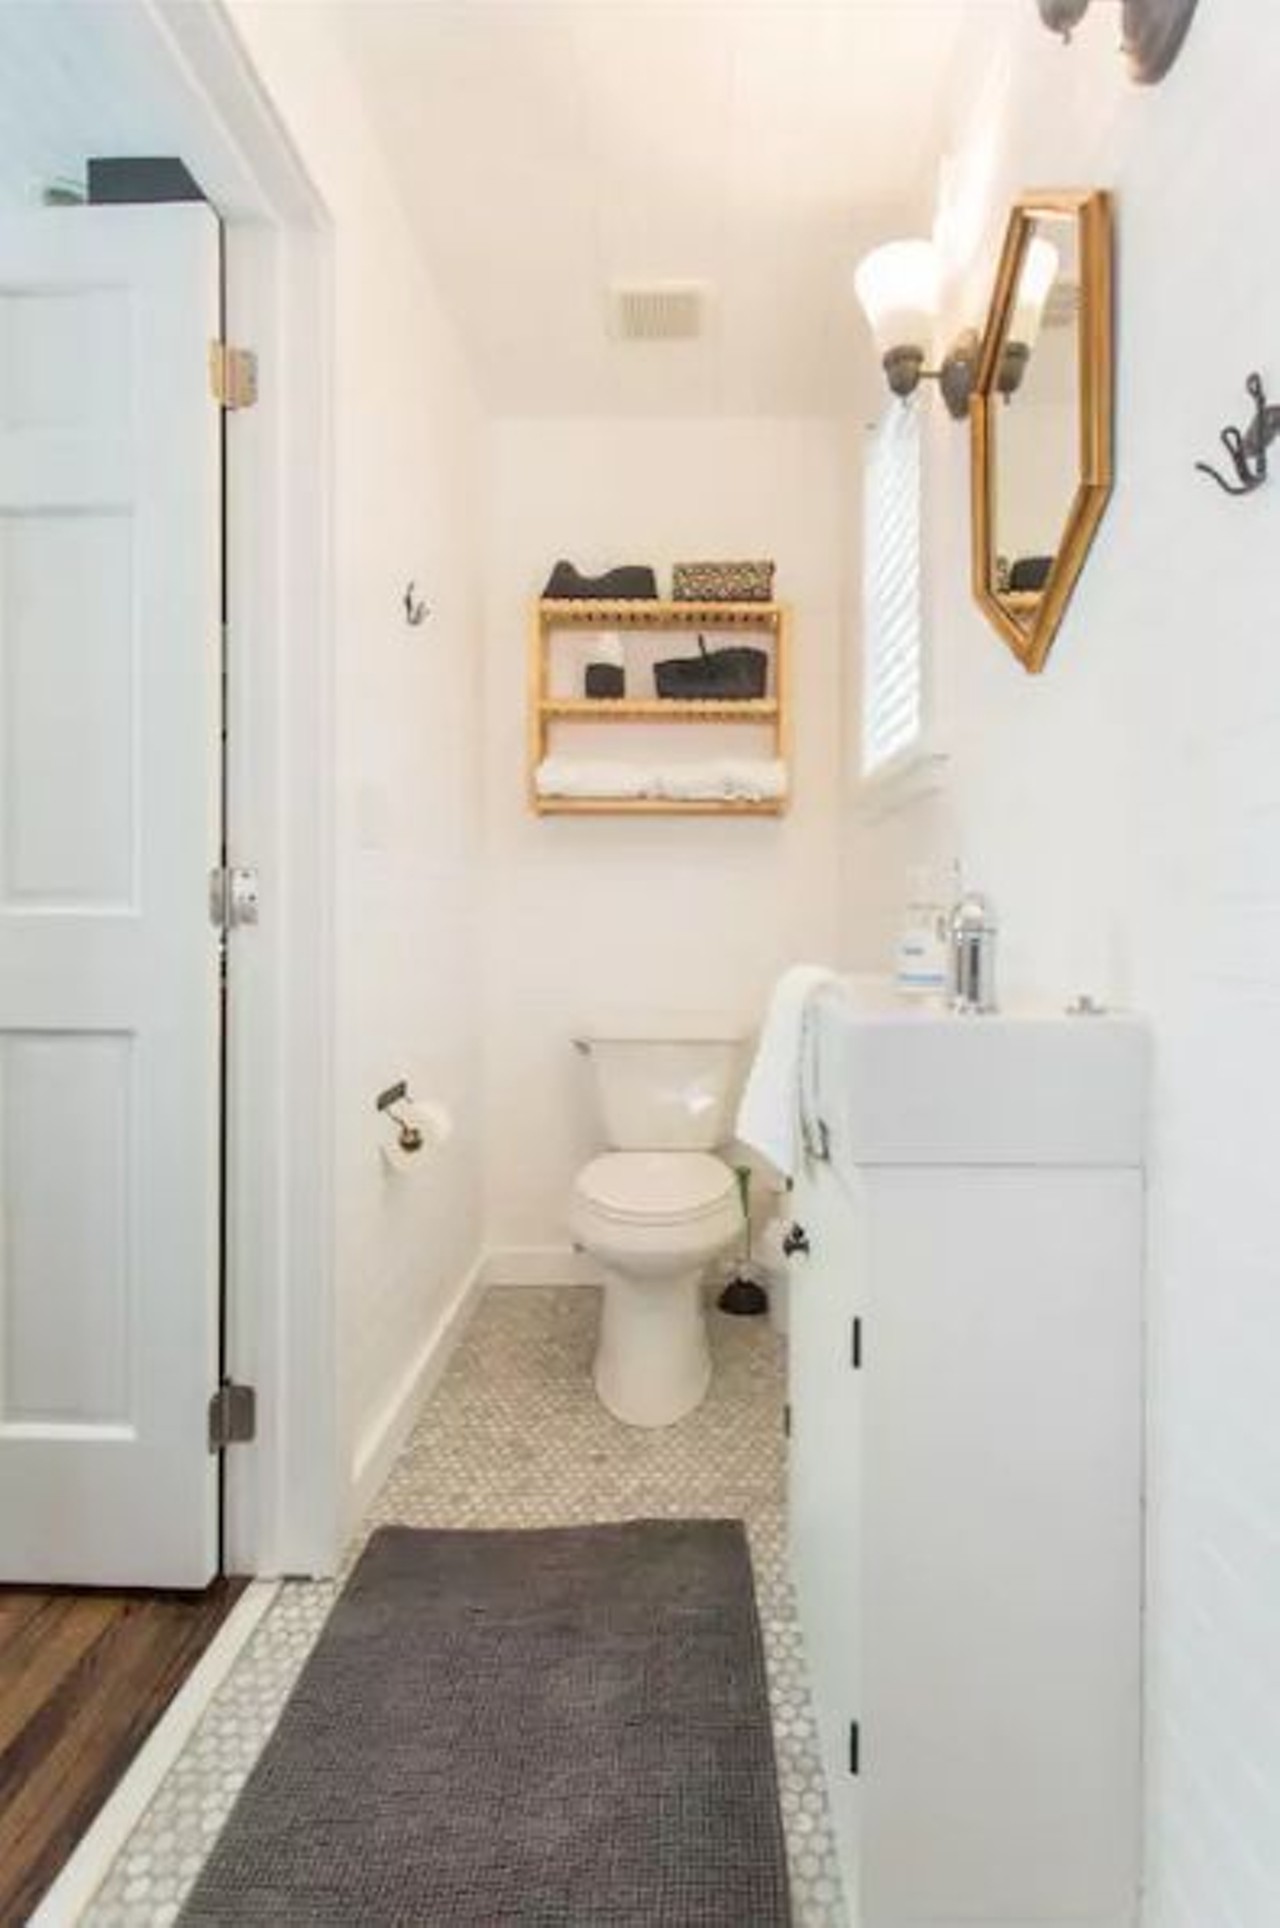 Tiny Cottage | Ybor City
$80/night
1 bed, 1 bath
The private bathroom also has ample vanity space.